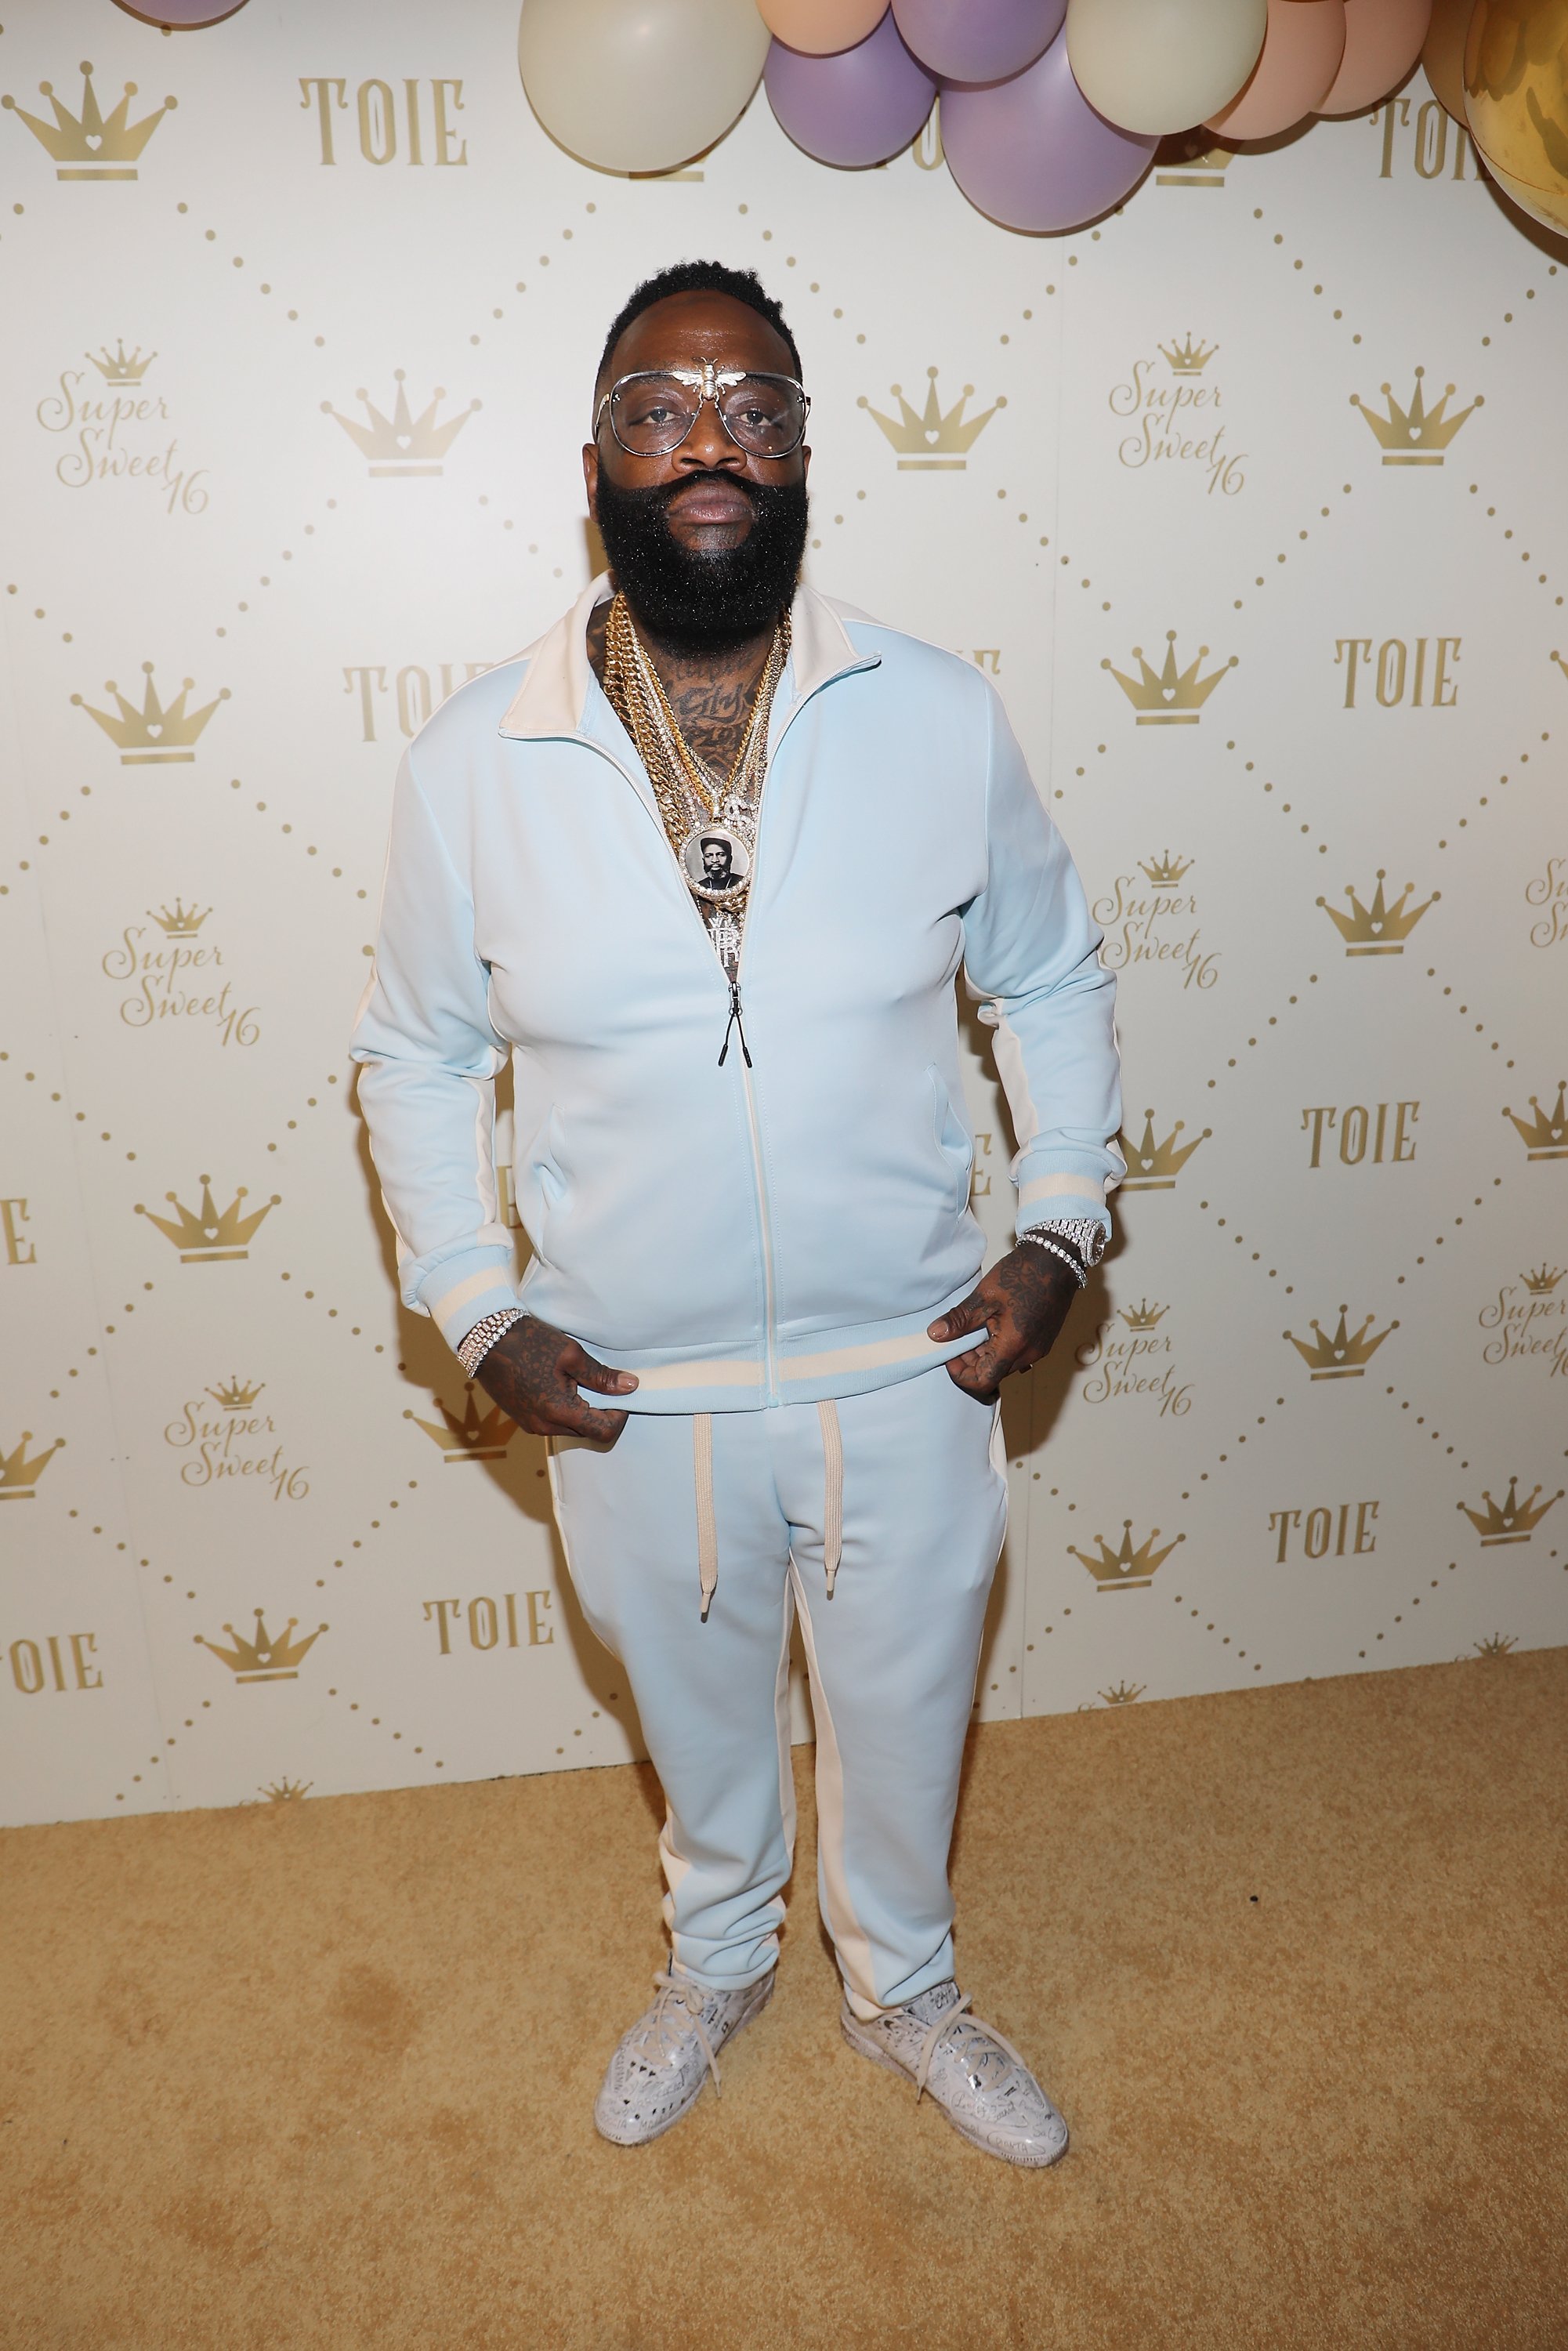 Rick Ross attending Toie's Royal Court: Super Sweet 16 at the Versace Mansion in Miami in April 2017. | Photo: Getty Images